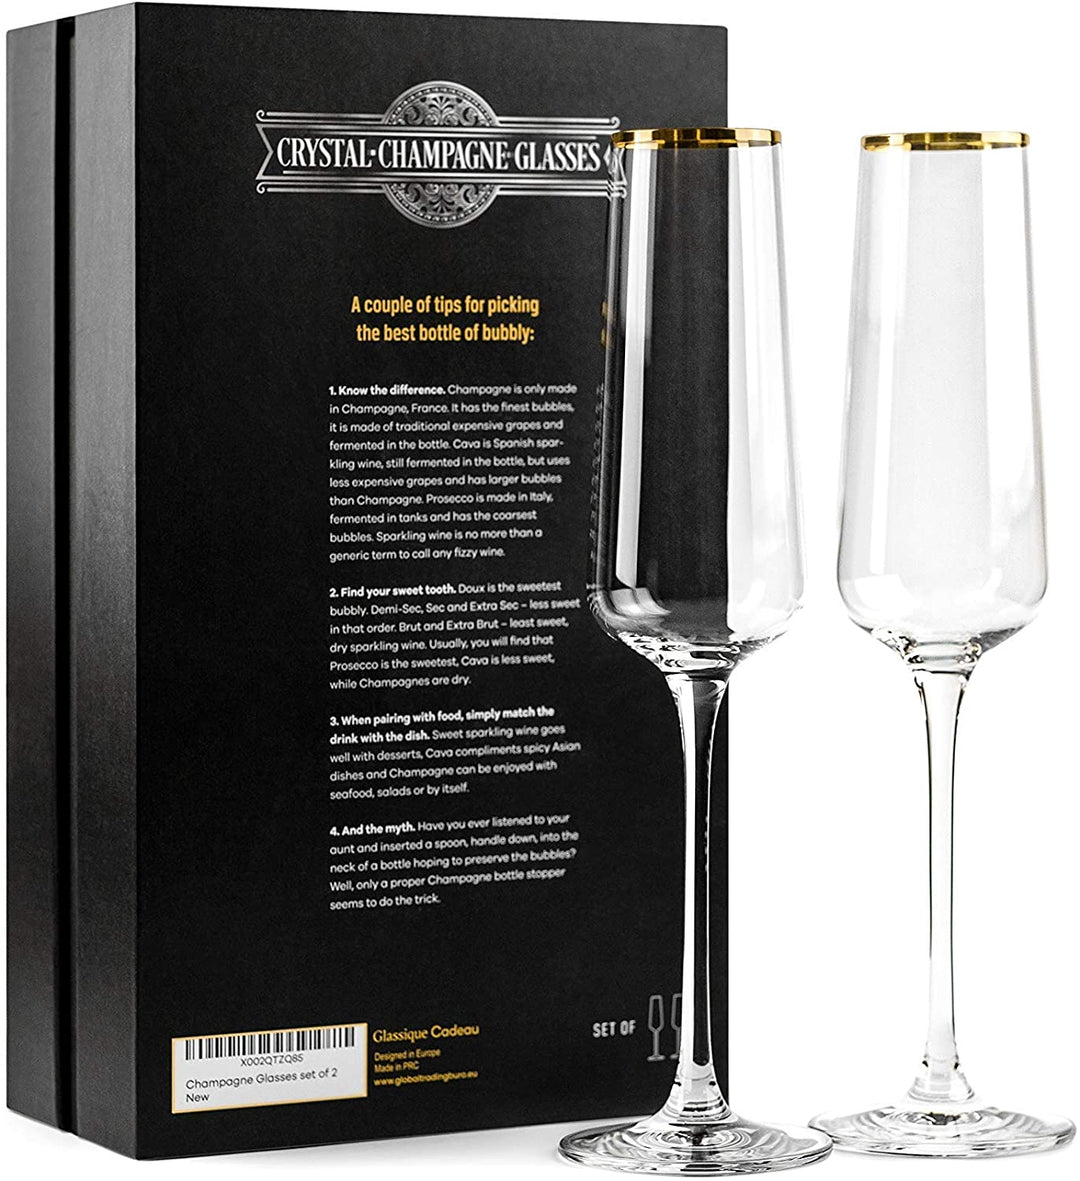 The Best Champagne Flute Glasses & Sets